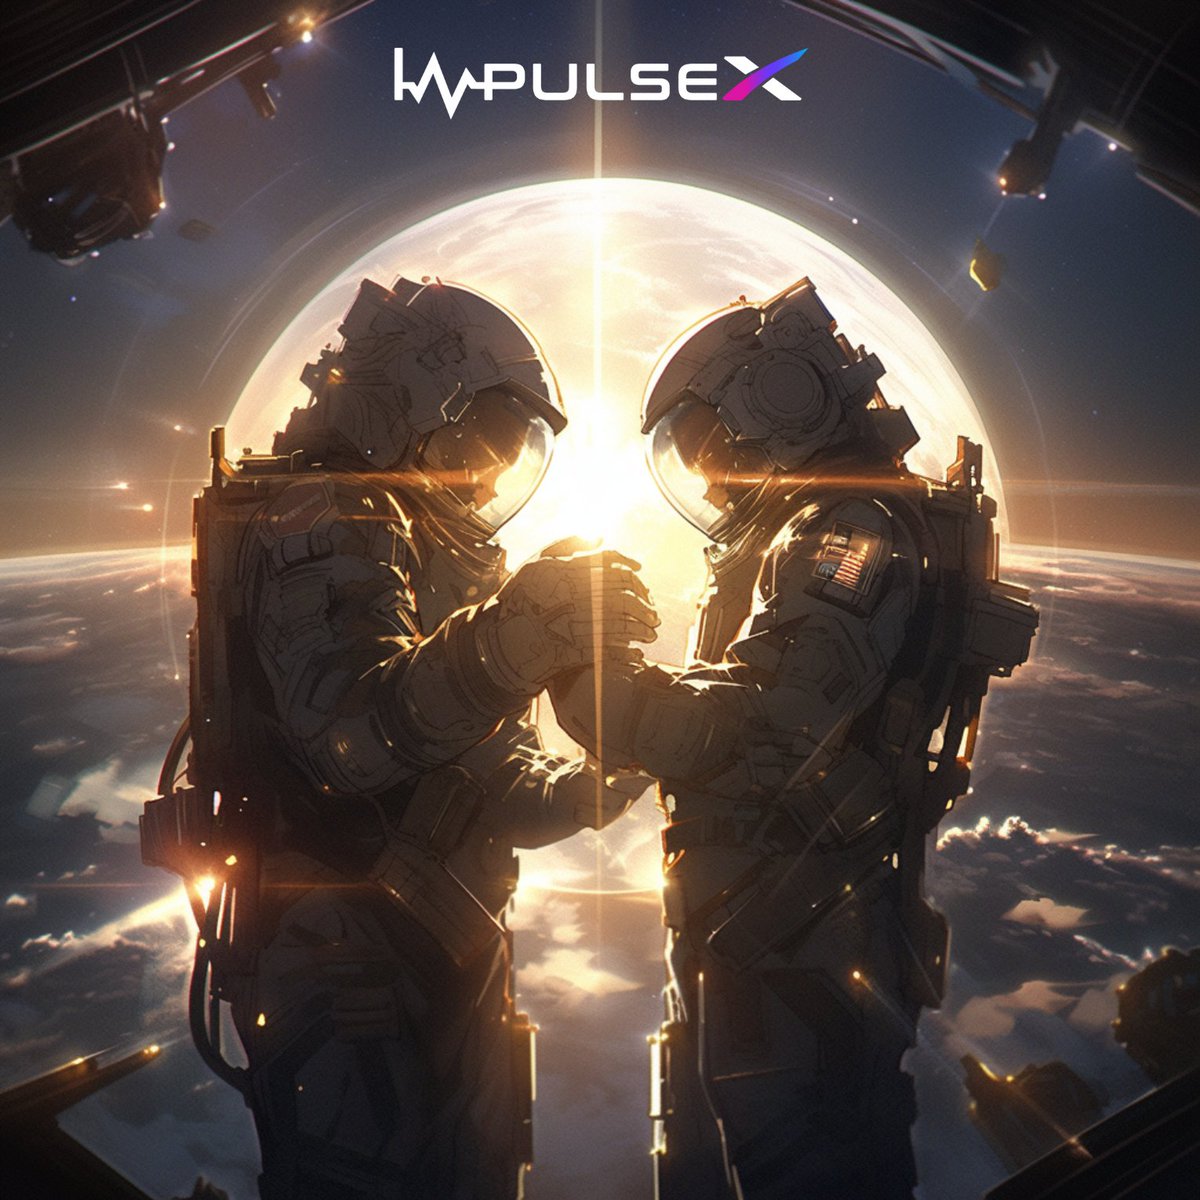 The InpulseX community is proud to support the Mars mission. 
Do not miss out!!!
Join the Movement.

#InpulseX #MarsMission #Multiplanetaryspecies #JoinTheMovement